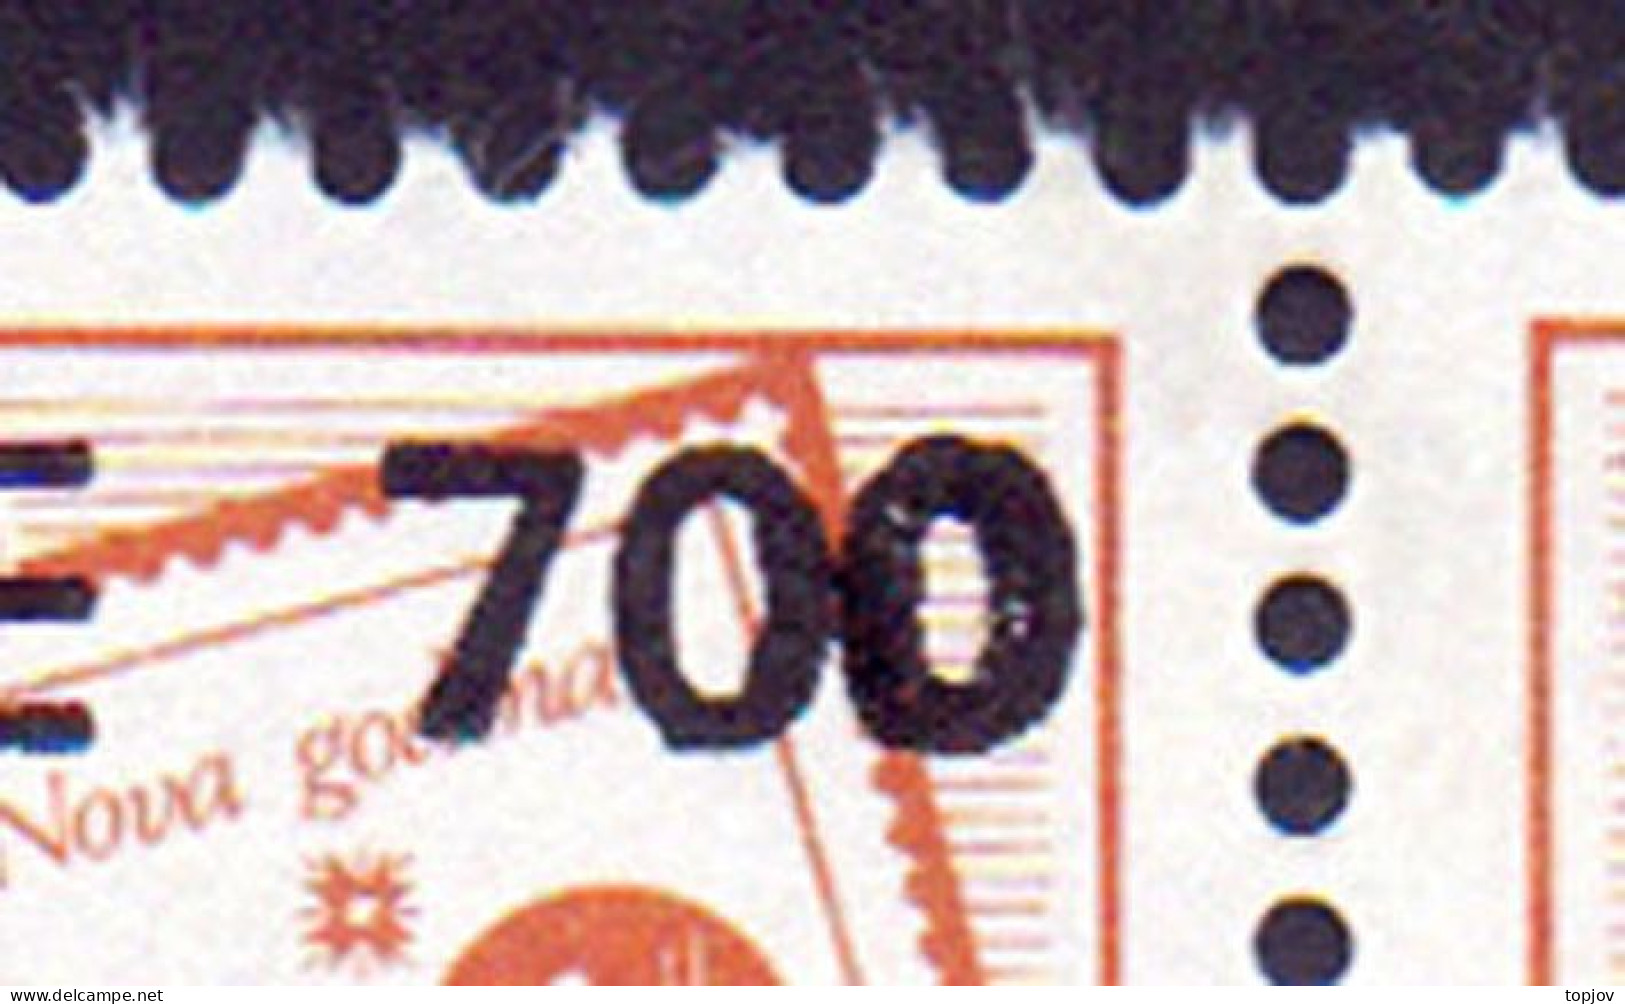 JUGOSLAVIA - ERROR  STAGECOACH  OVPT.   THICK NUMBER VALUE  St.of 4x - **MNH - Imperforates, Proofs & Errors